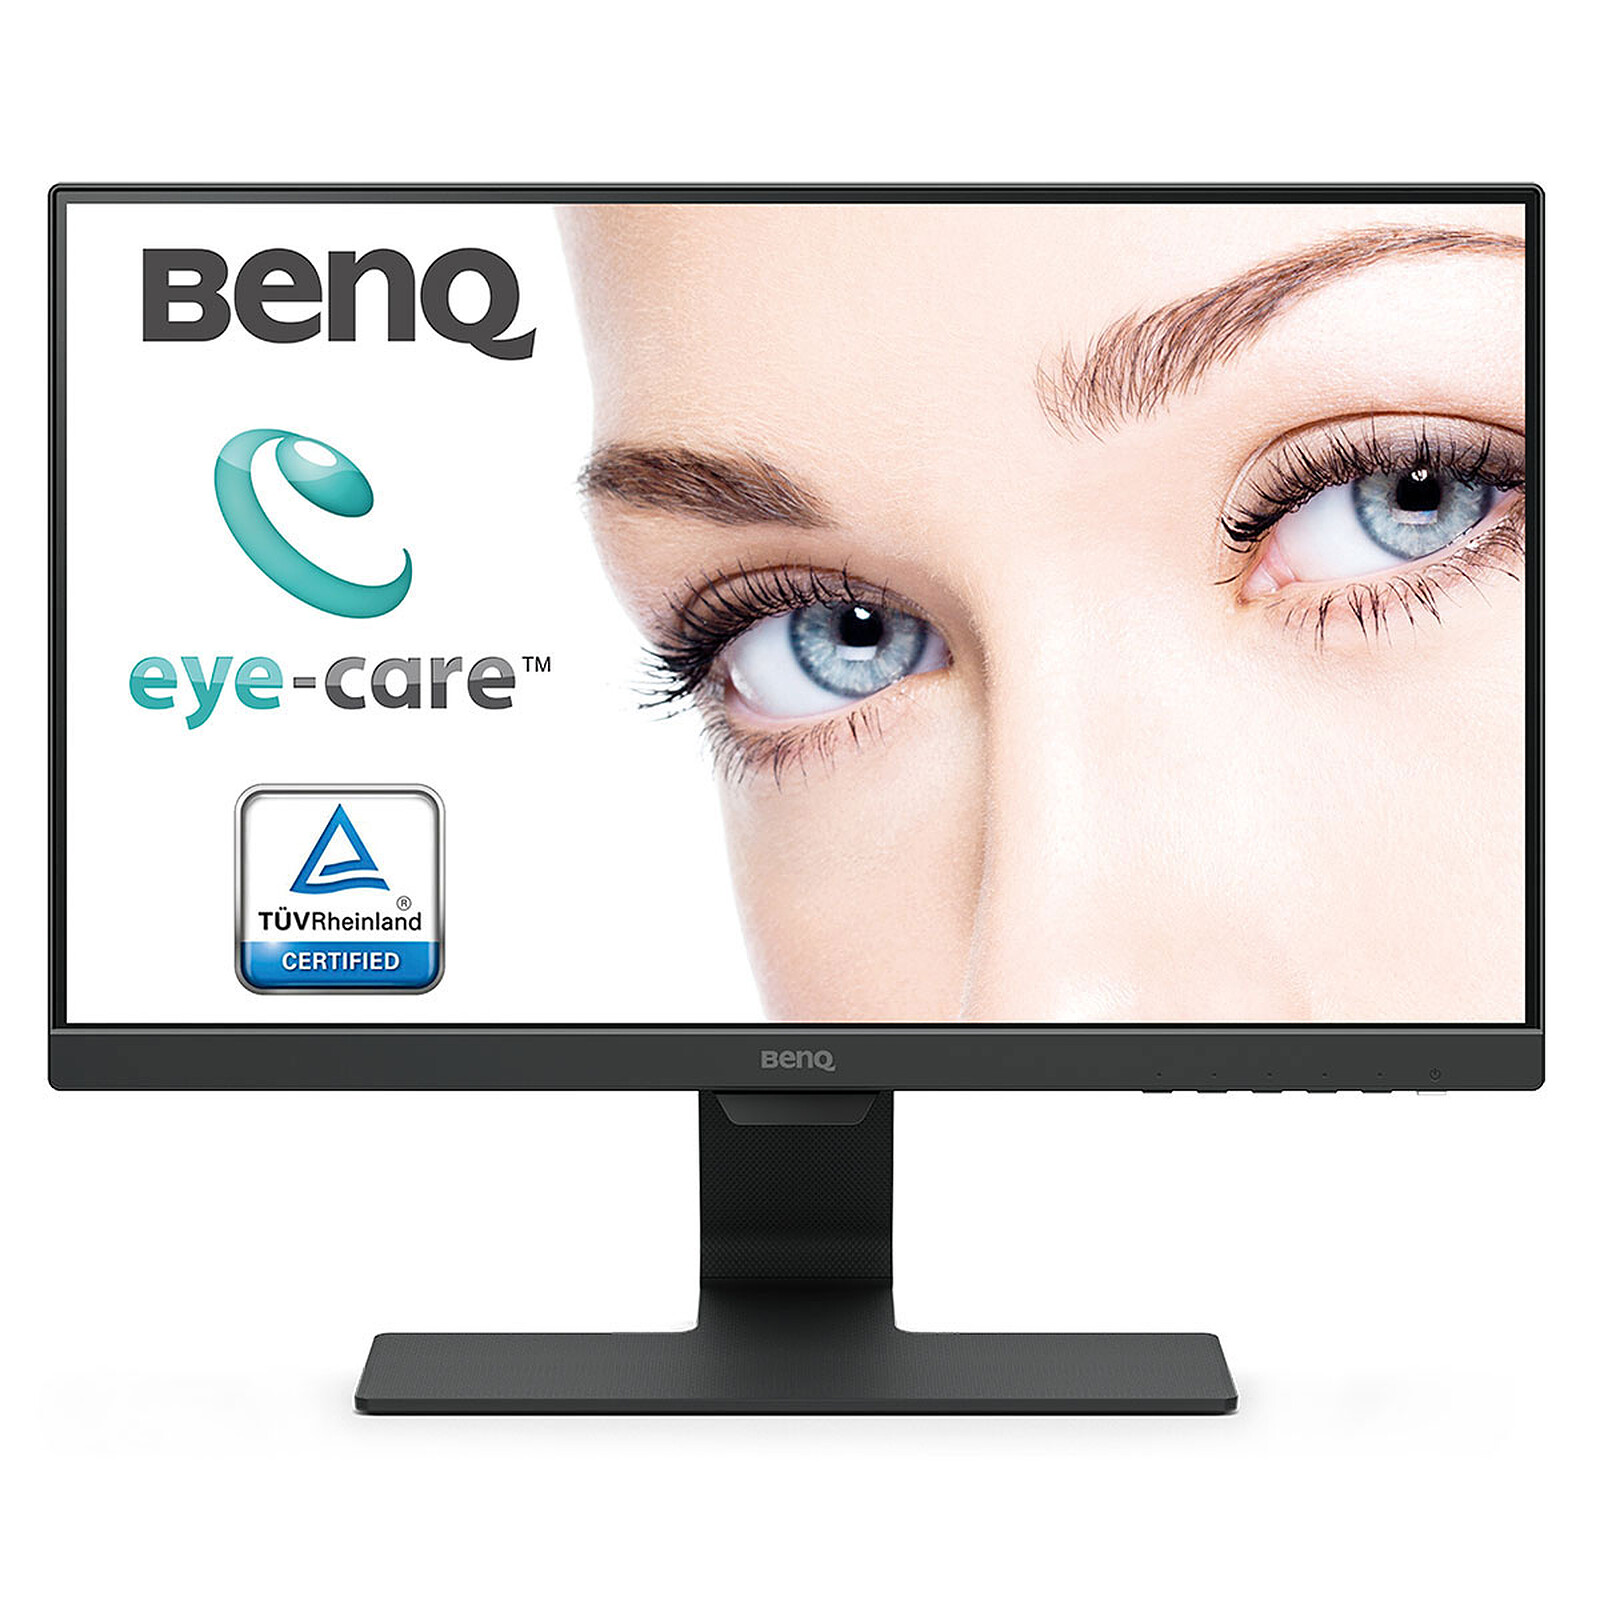 starved ceiling Available BenQ 21.5" LED - GW2280 - PC monitor BenQ on LDLC